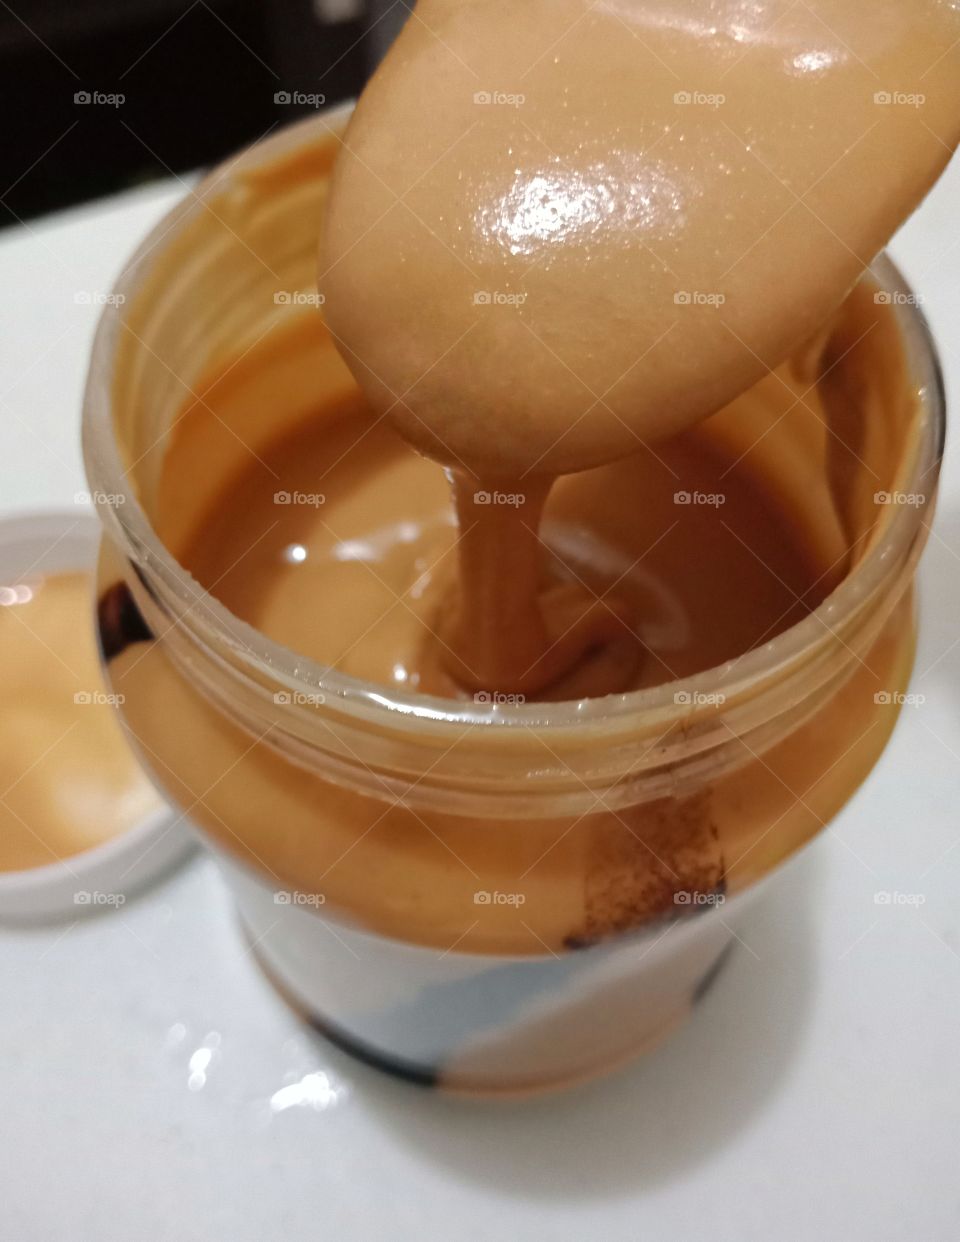 Creamy and delicious peanut butter. Yum!